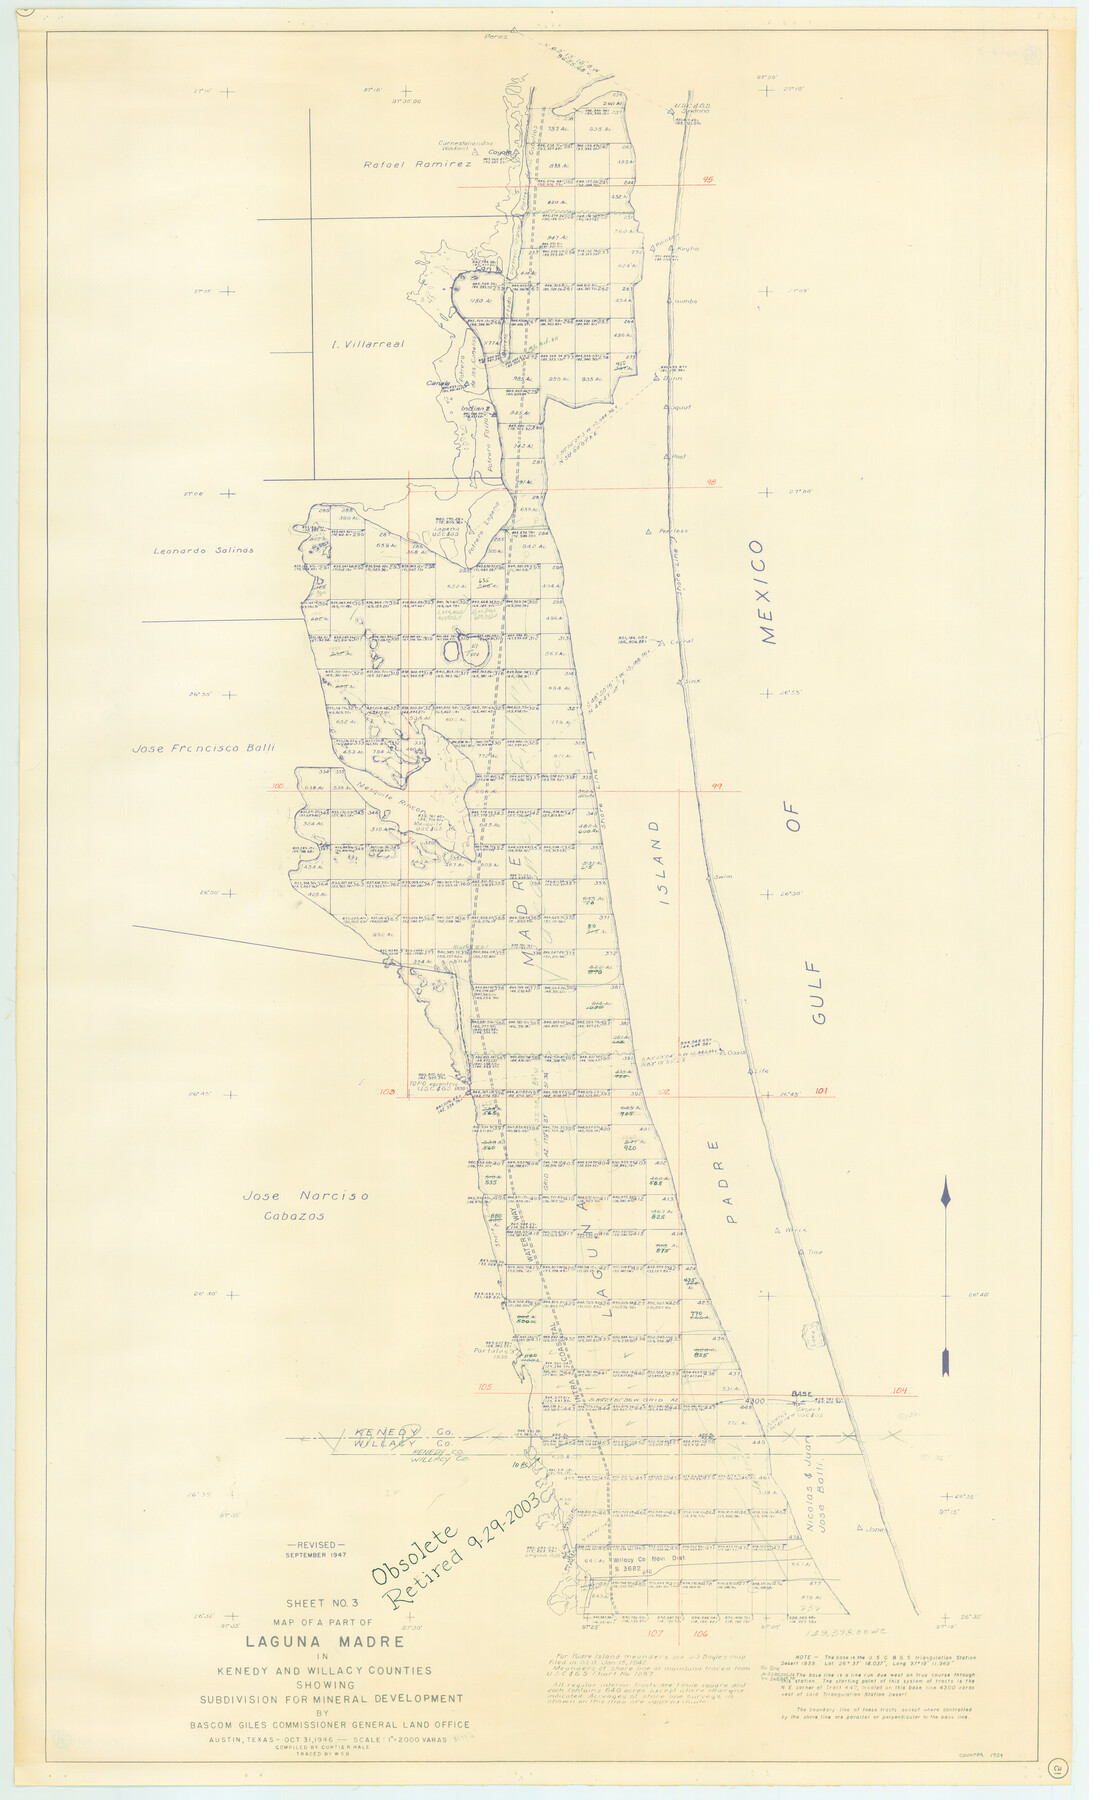 1924, Part of Laguna Madre in Kenedy and Willacy Counties, showing Subdivision for Mineral Development, General Map Collection